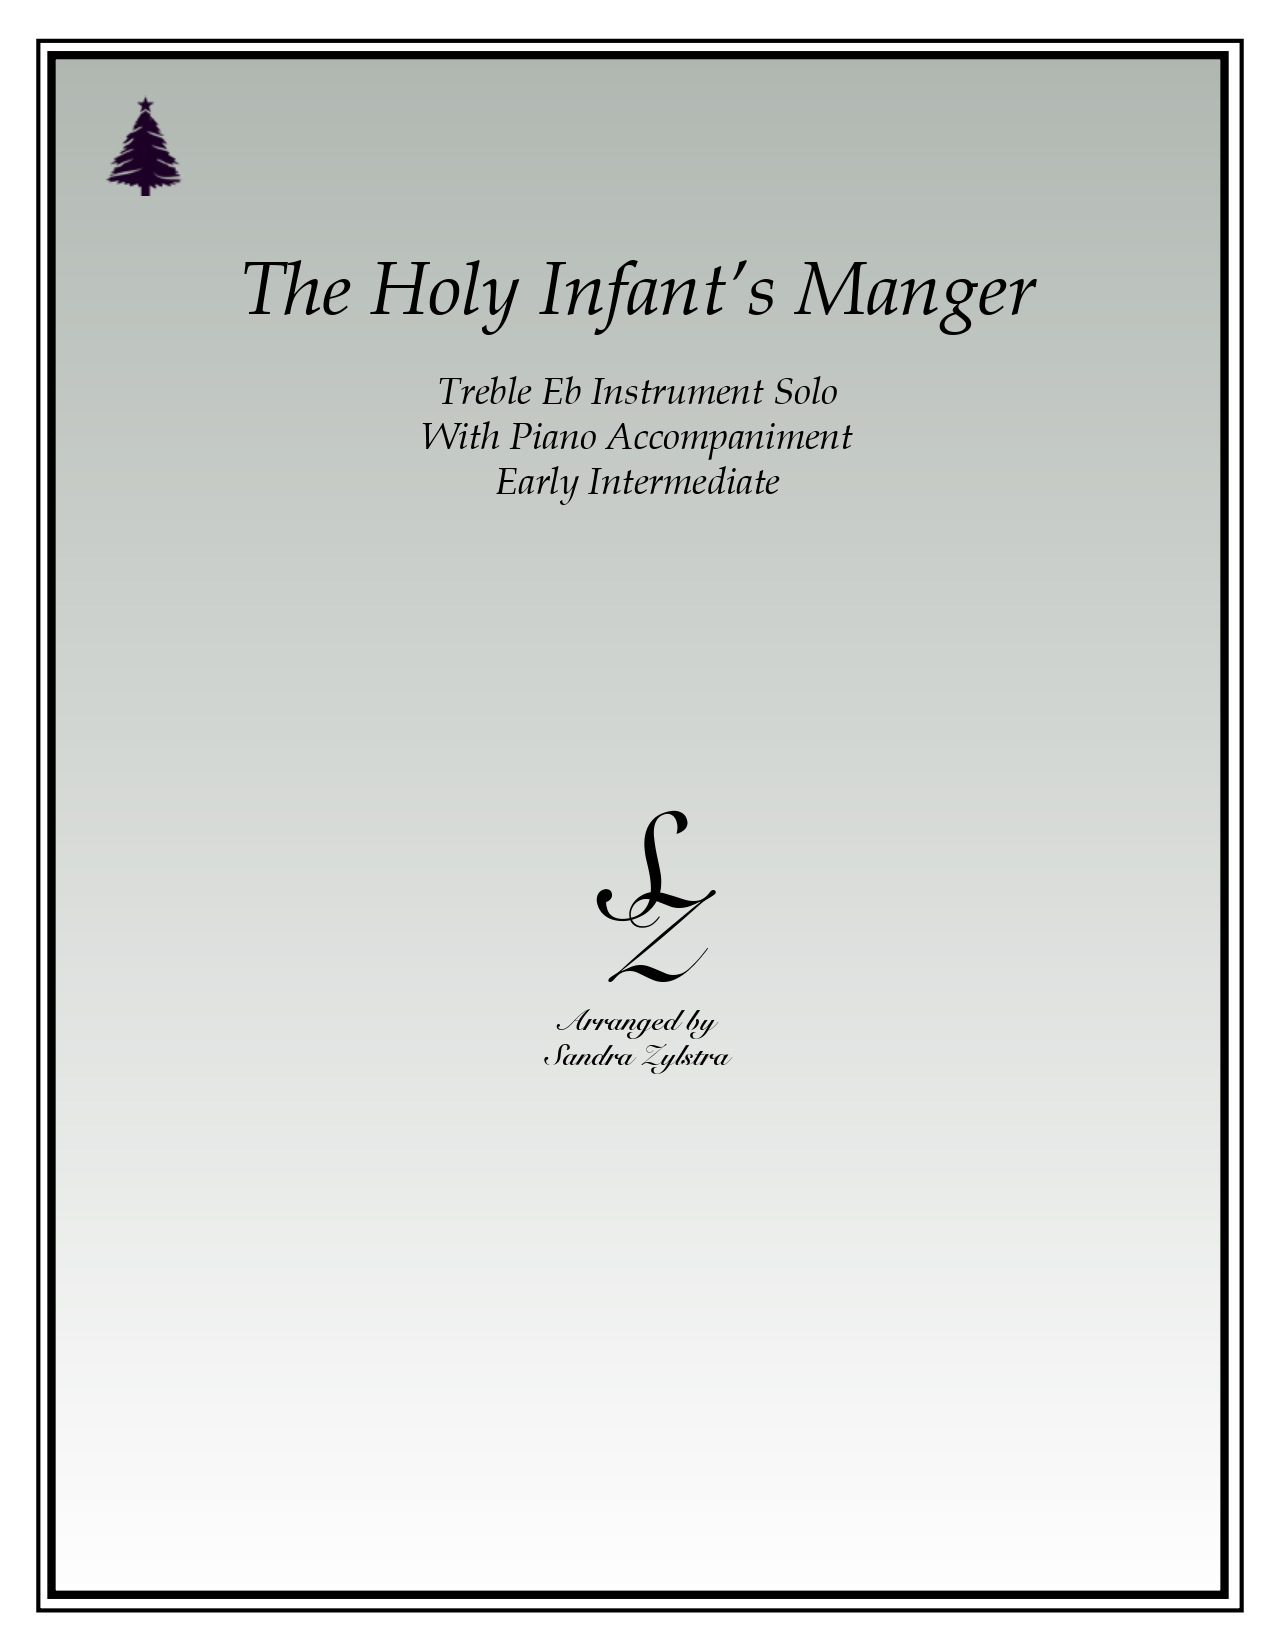 The Holy Infants Manger Eb instrument solo part cover page 00011